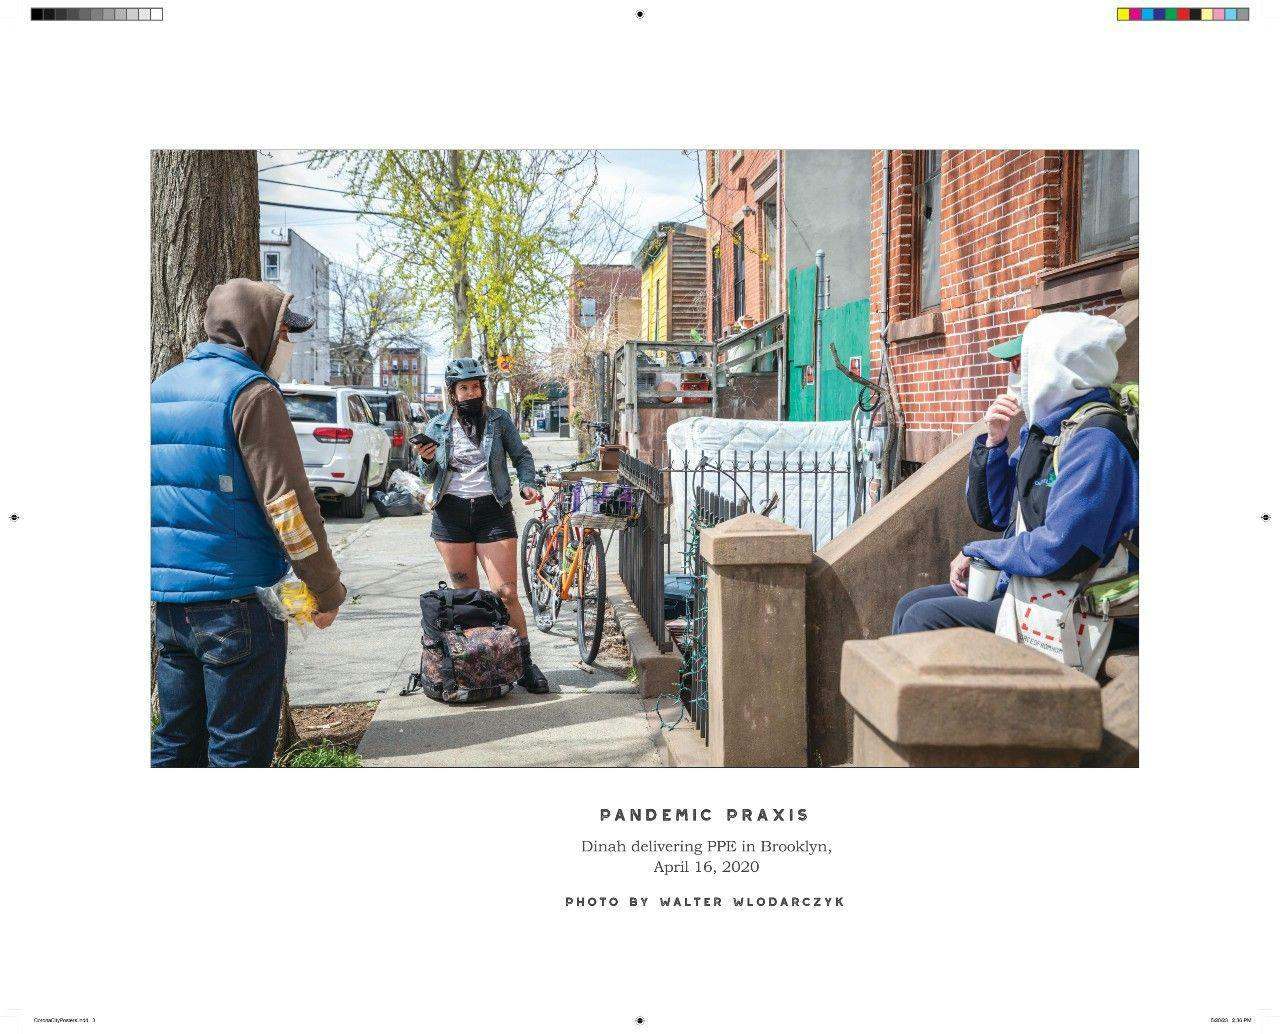 Dinah Gumns delivering PPE in Brooklyn, April 16, 2020.    (Photo by Walter Wlodarczyk, printed in Corona City.)